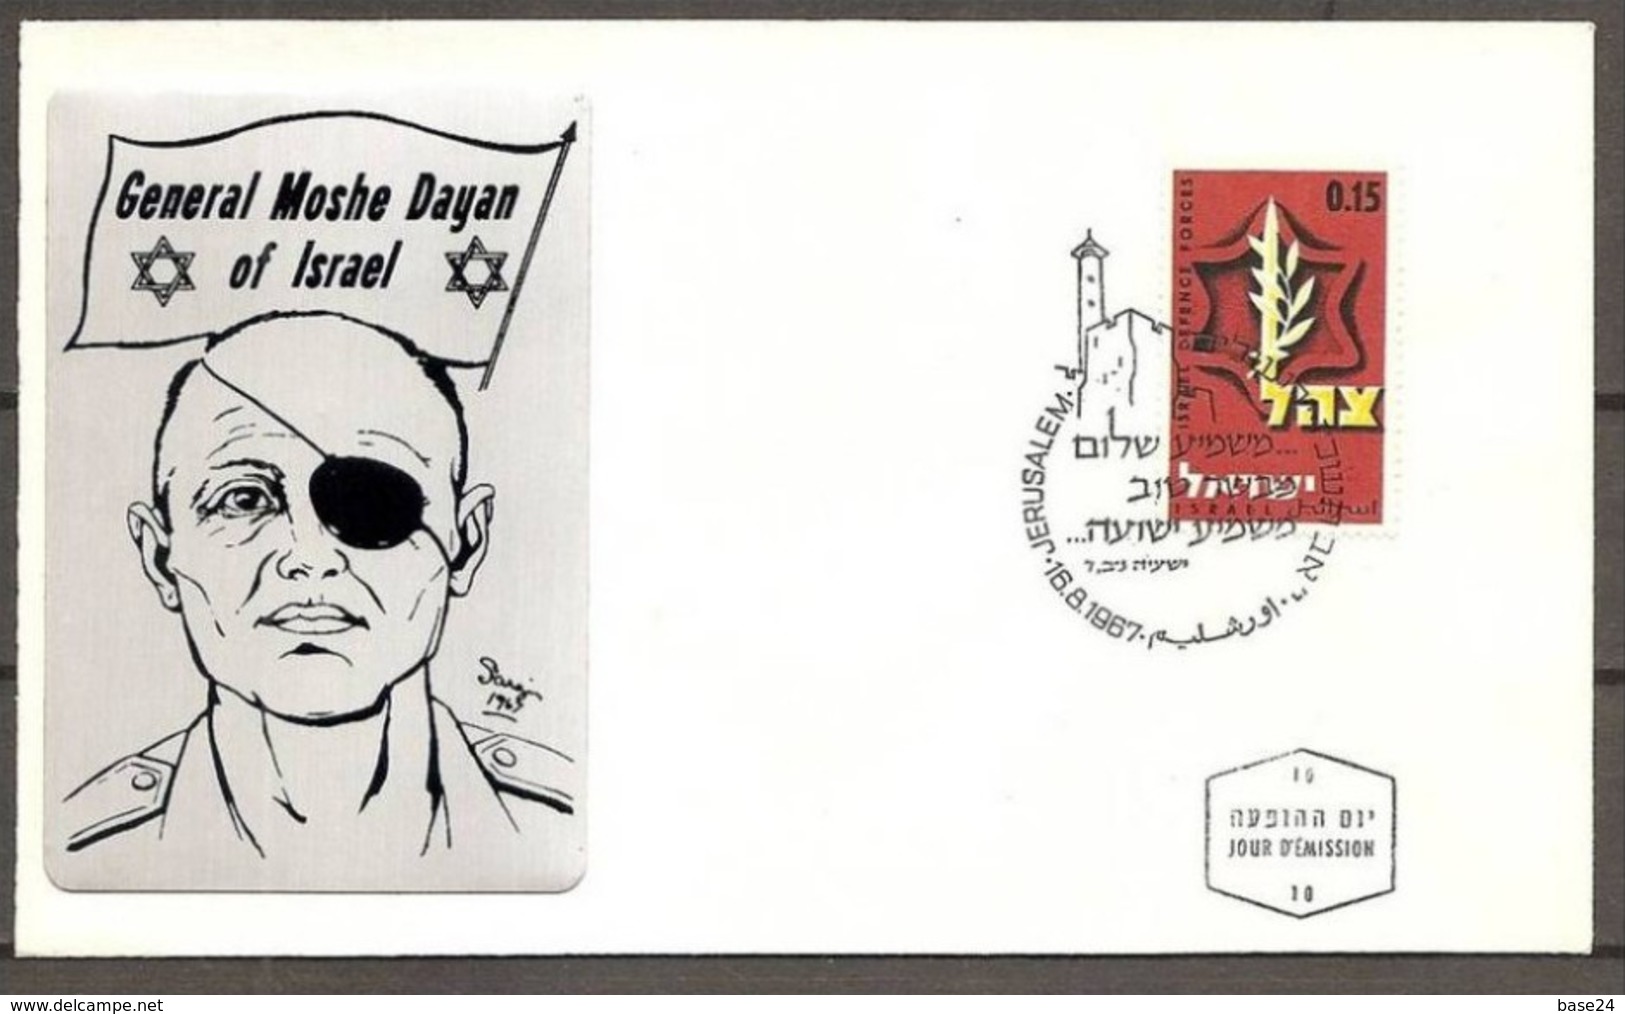 1967 Israele Israel GENERAL MOSHE DAYAN Busta Con Lastra Metallo E Annullo Forze Armate Israeliane 16/8/87 - Used Stamps (without Tabs)